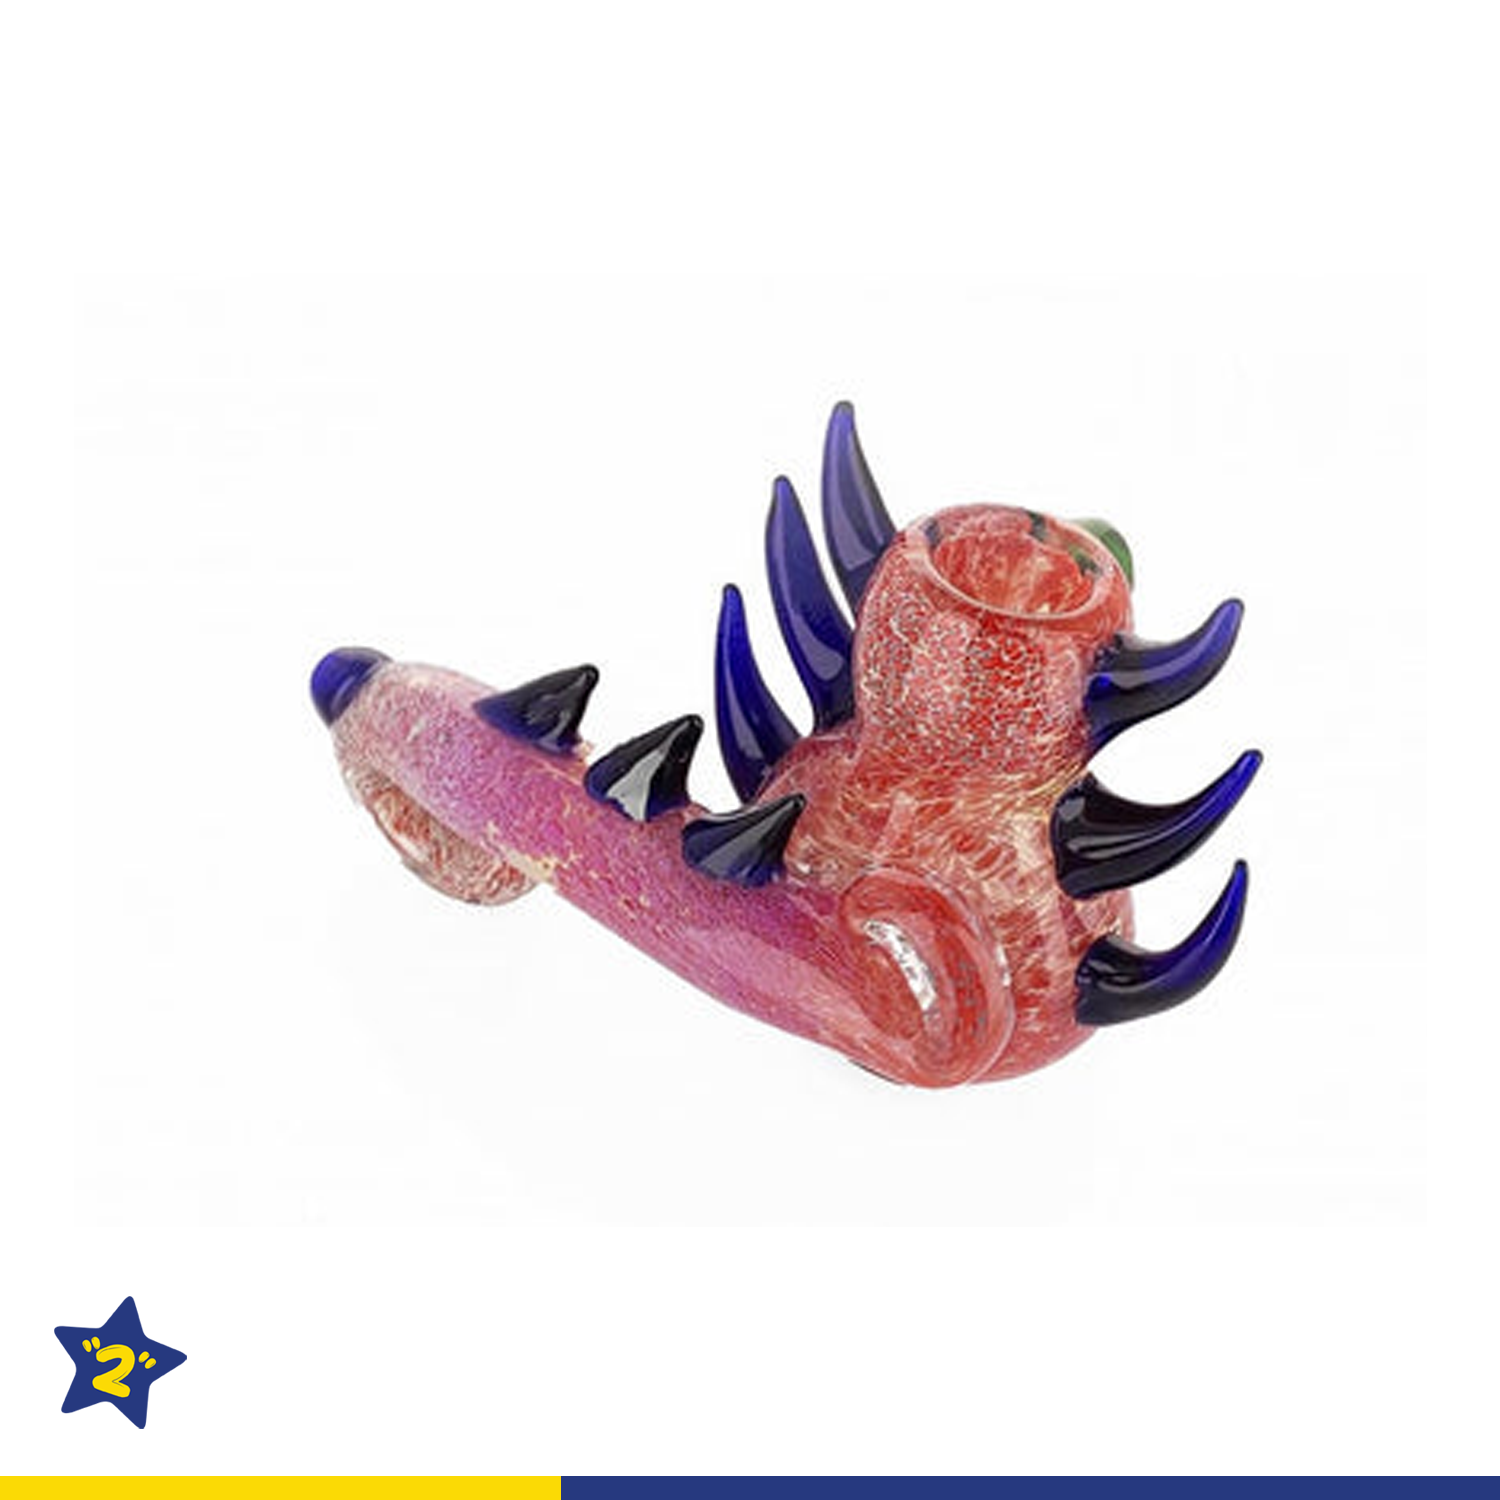 Heady Spiked Creature Pipe